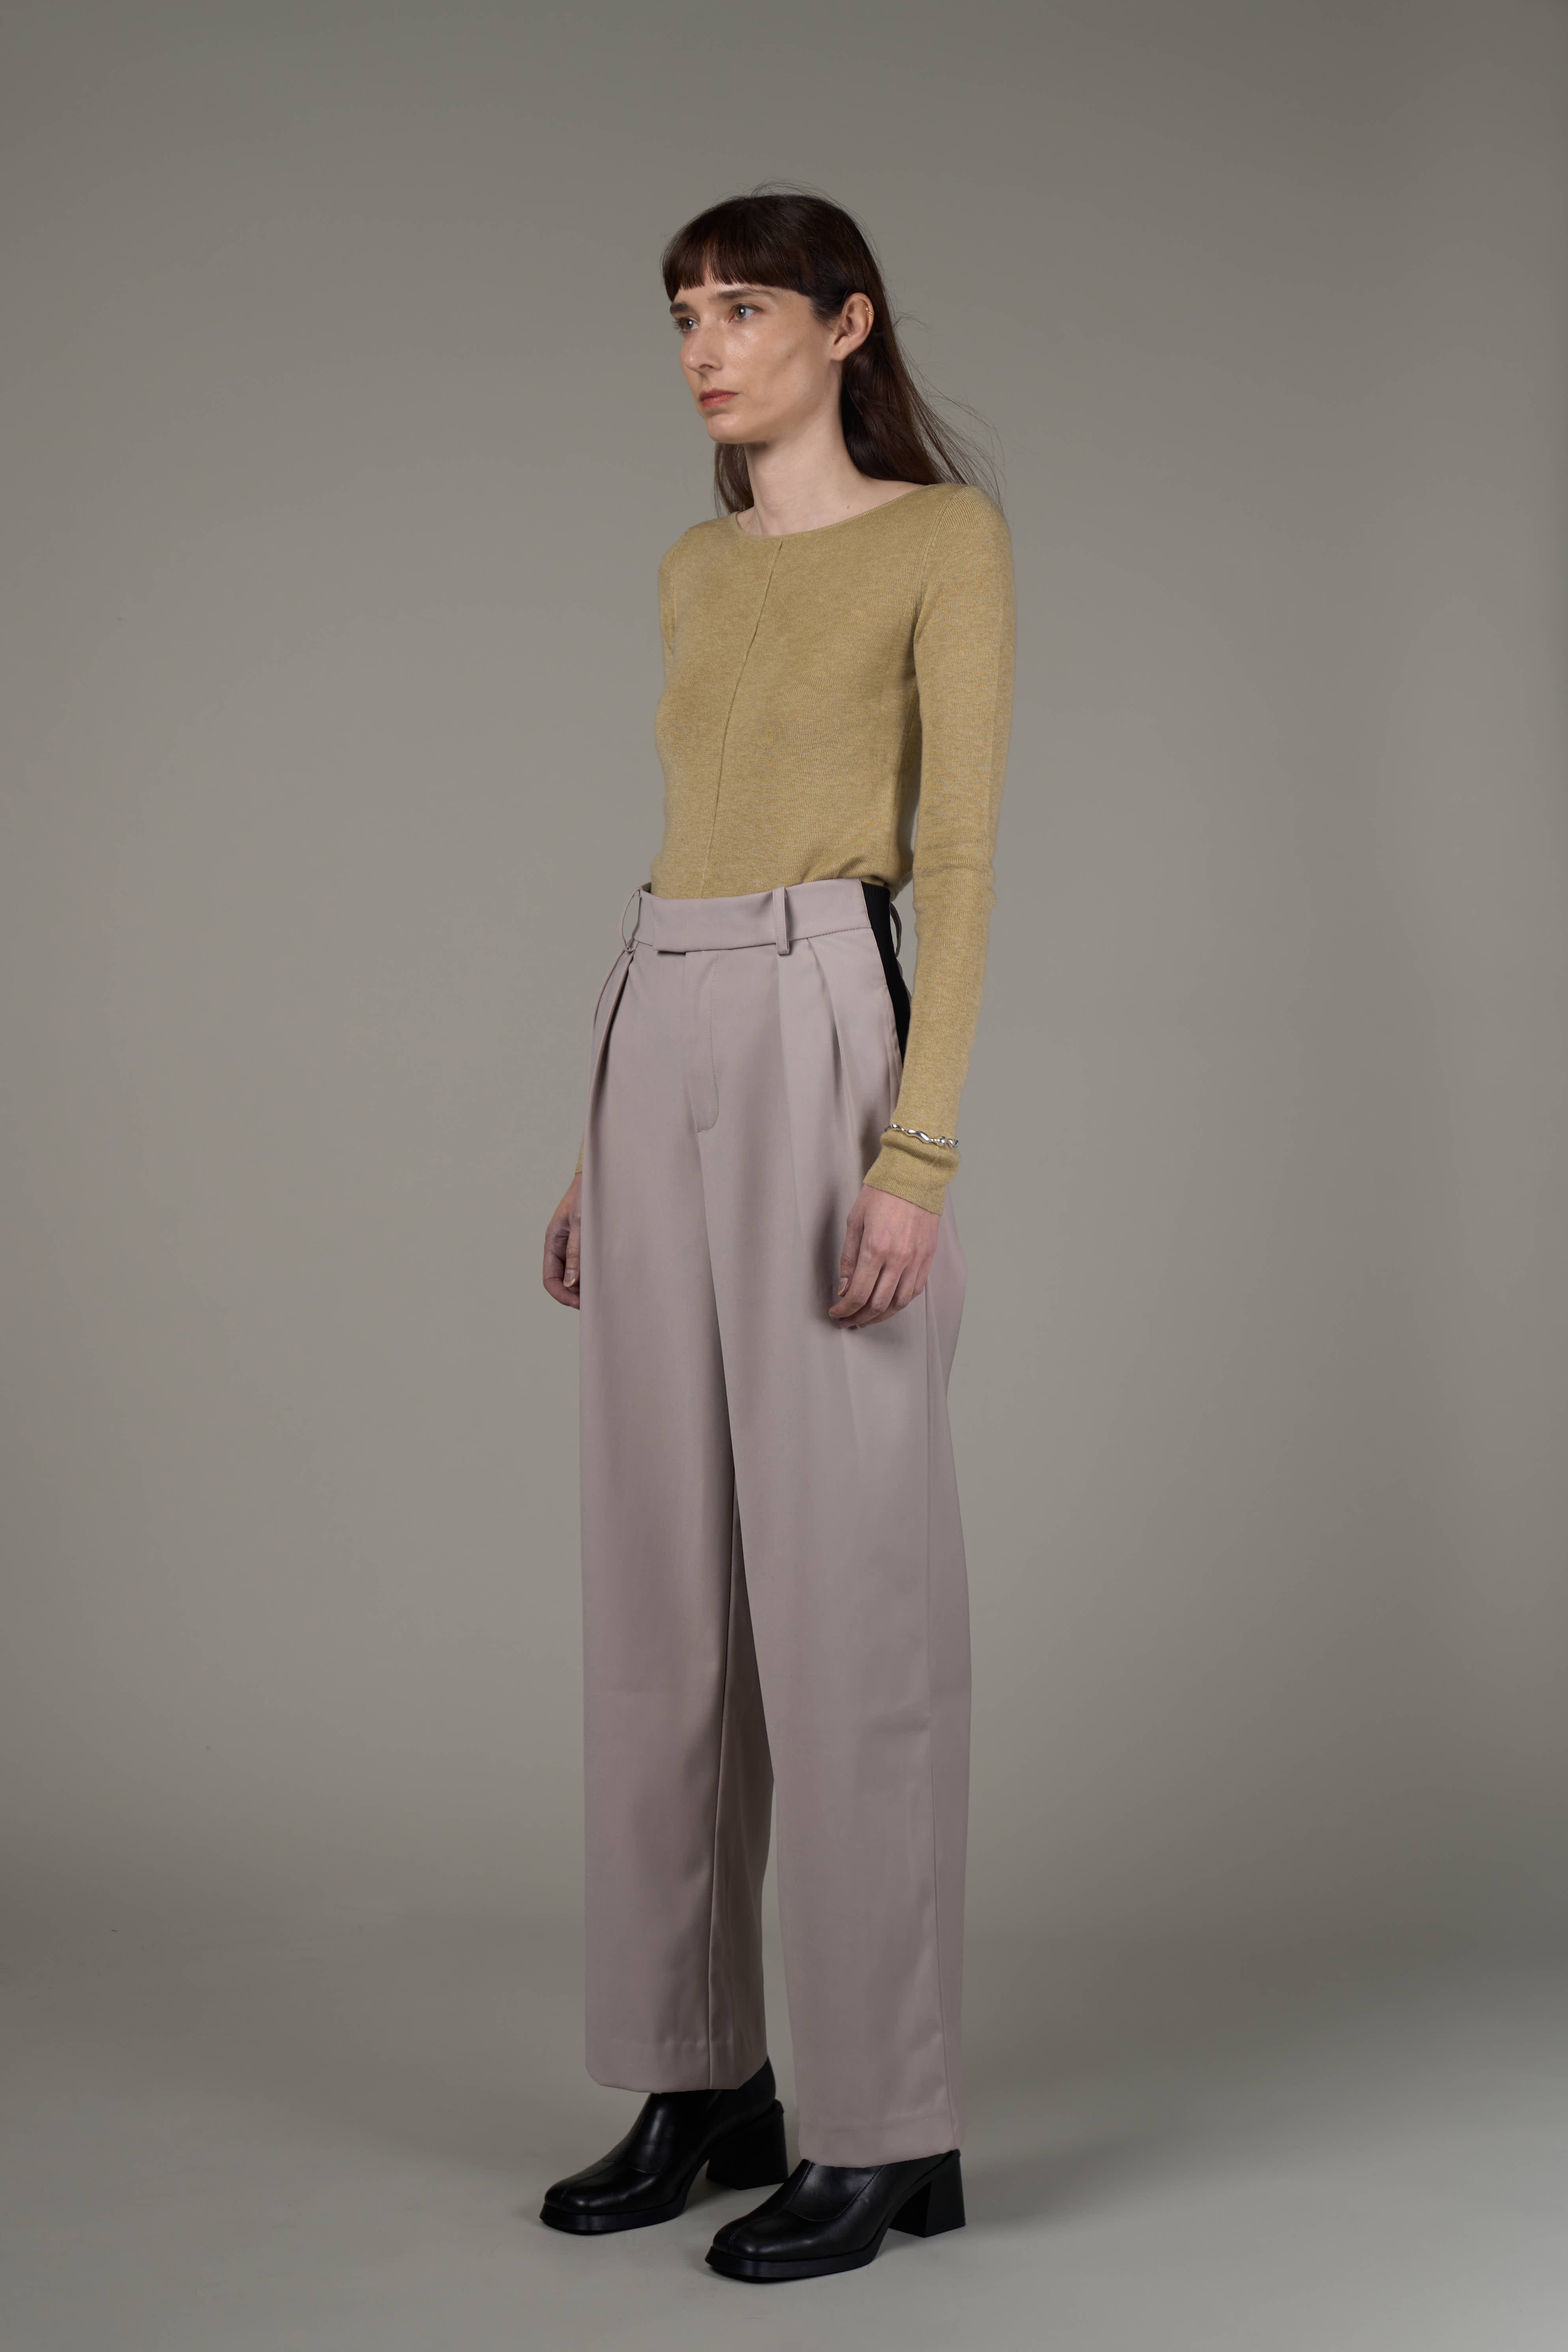 pants #trousers #High #Waist #Pastel High Waist Pastel Trousers - |  Aesthetic clothes, Fashion pants, Pastel aesthetic outfit